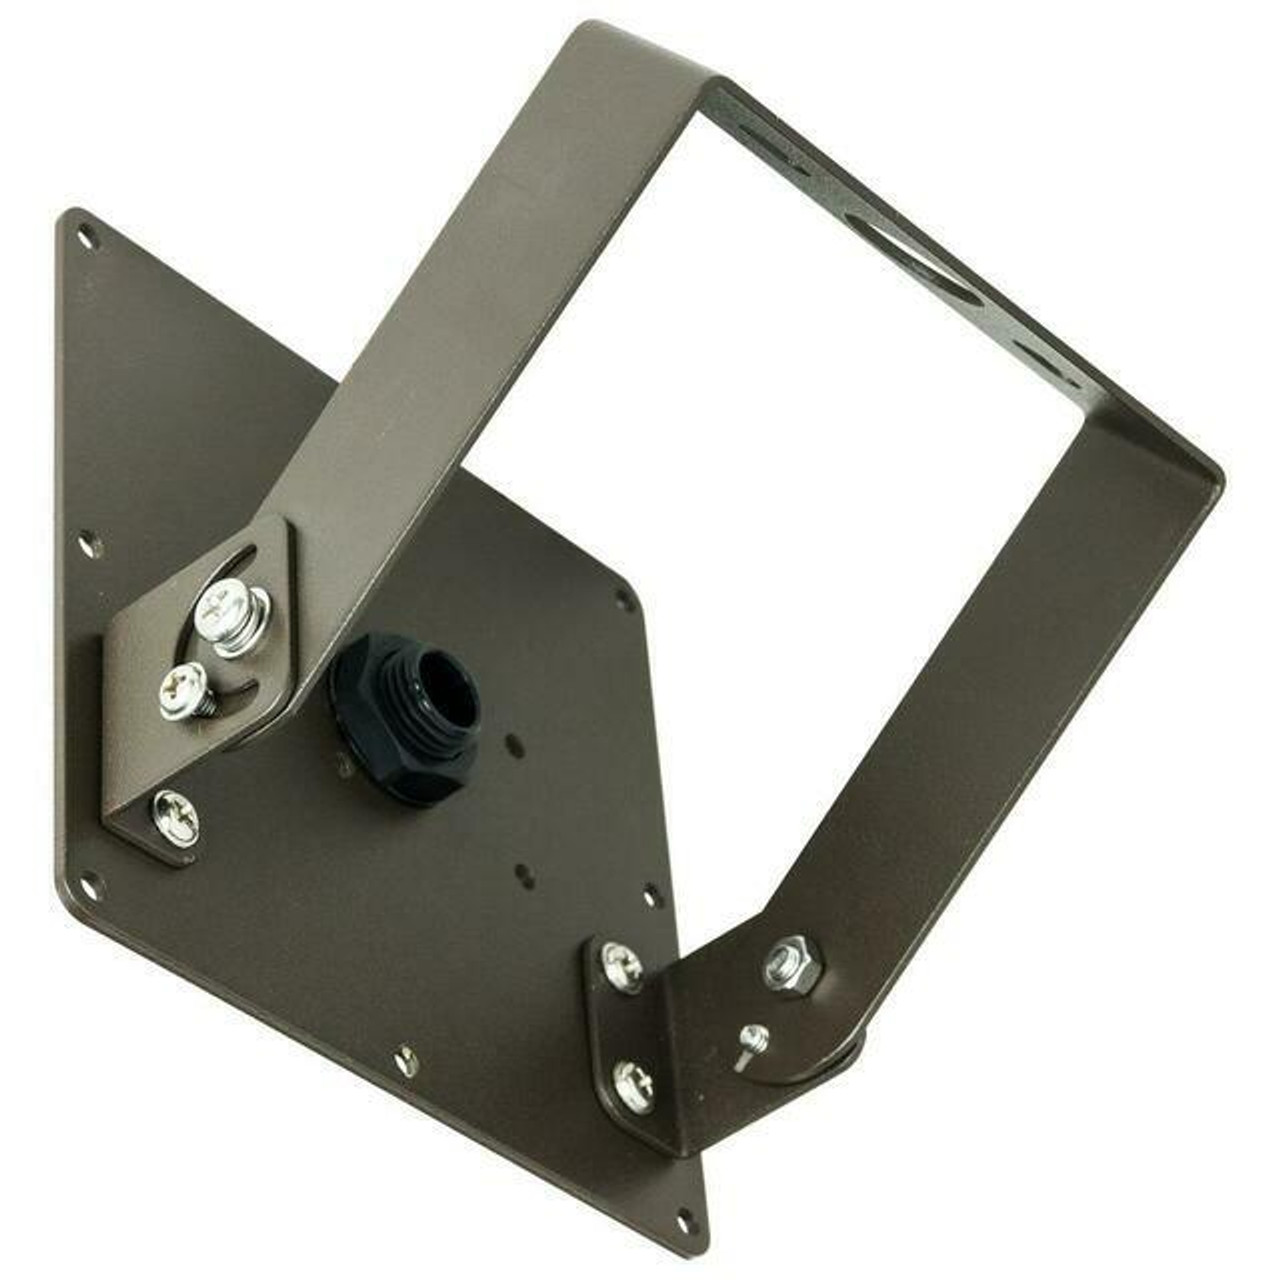 Mounts and Brackets